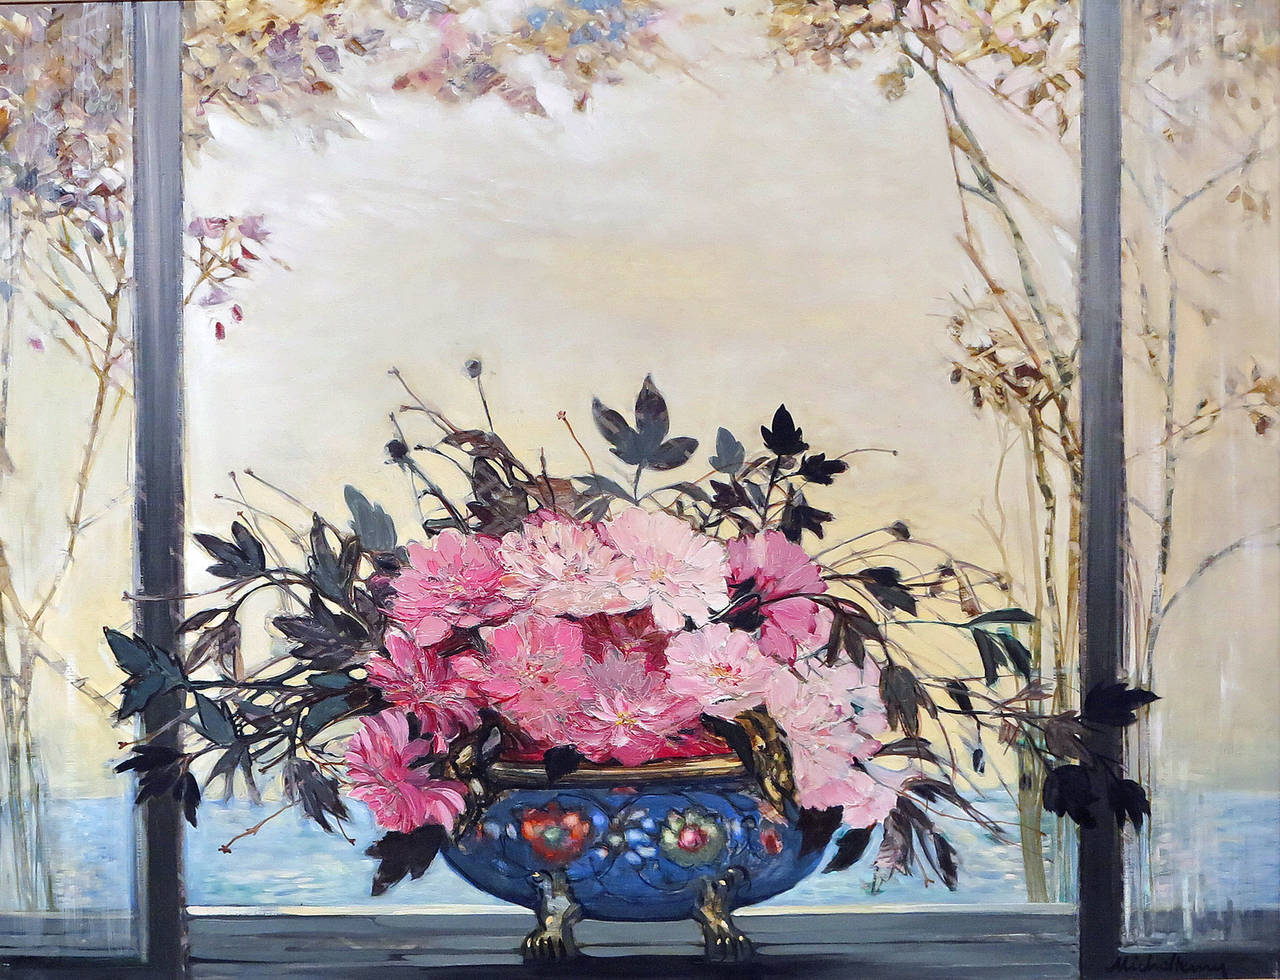 Michel Henry
French, 1928-
Bowl de Fleurs à la Fenêtre

Oil on canvas
35 by 45 in.  W/frame 41 by 51 in.
Signed lower right “Michel Henry”

Michel-Henry is acknowledged as an important painter in French contemporary art.  From 1952 his work has